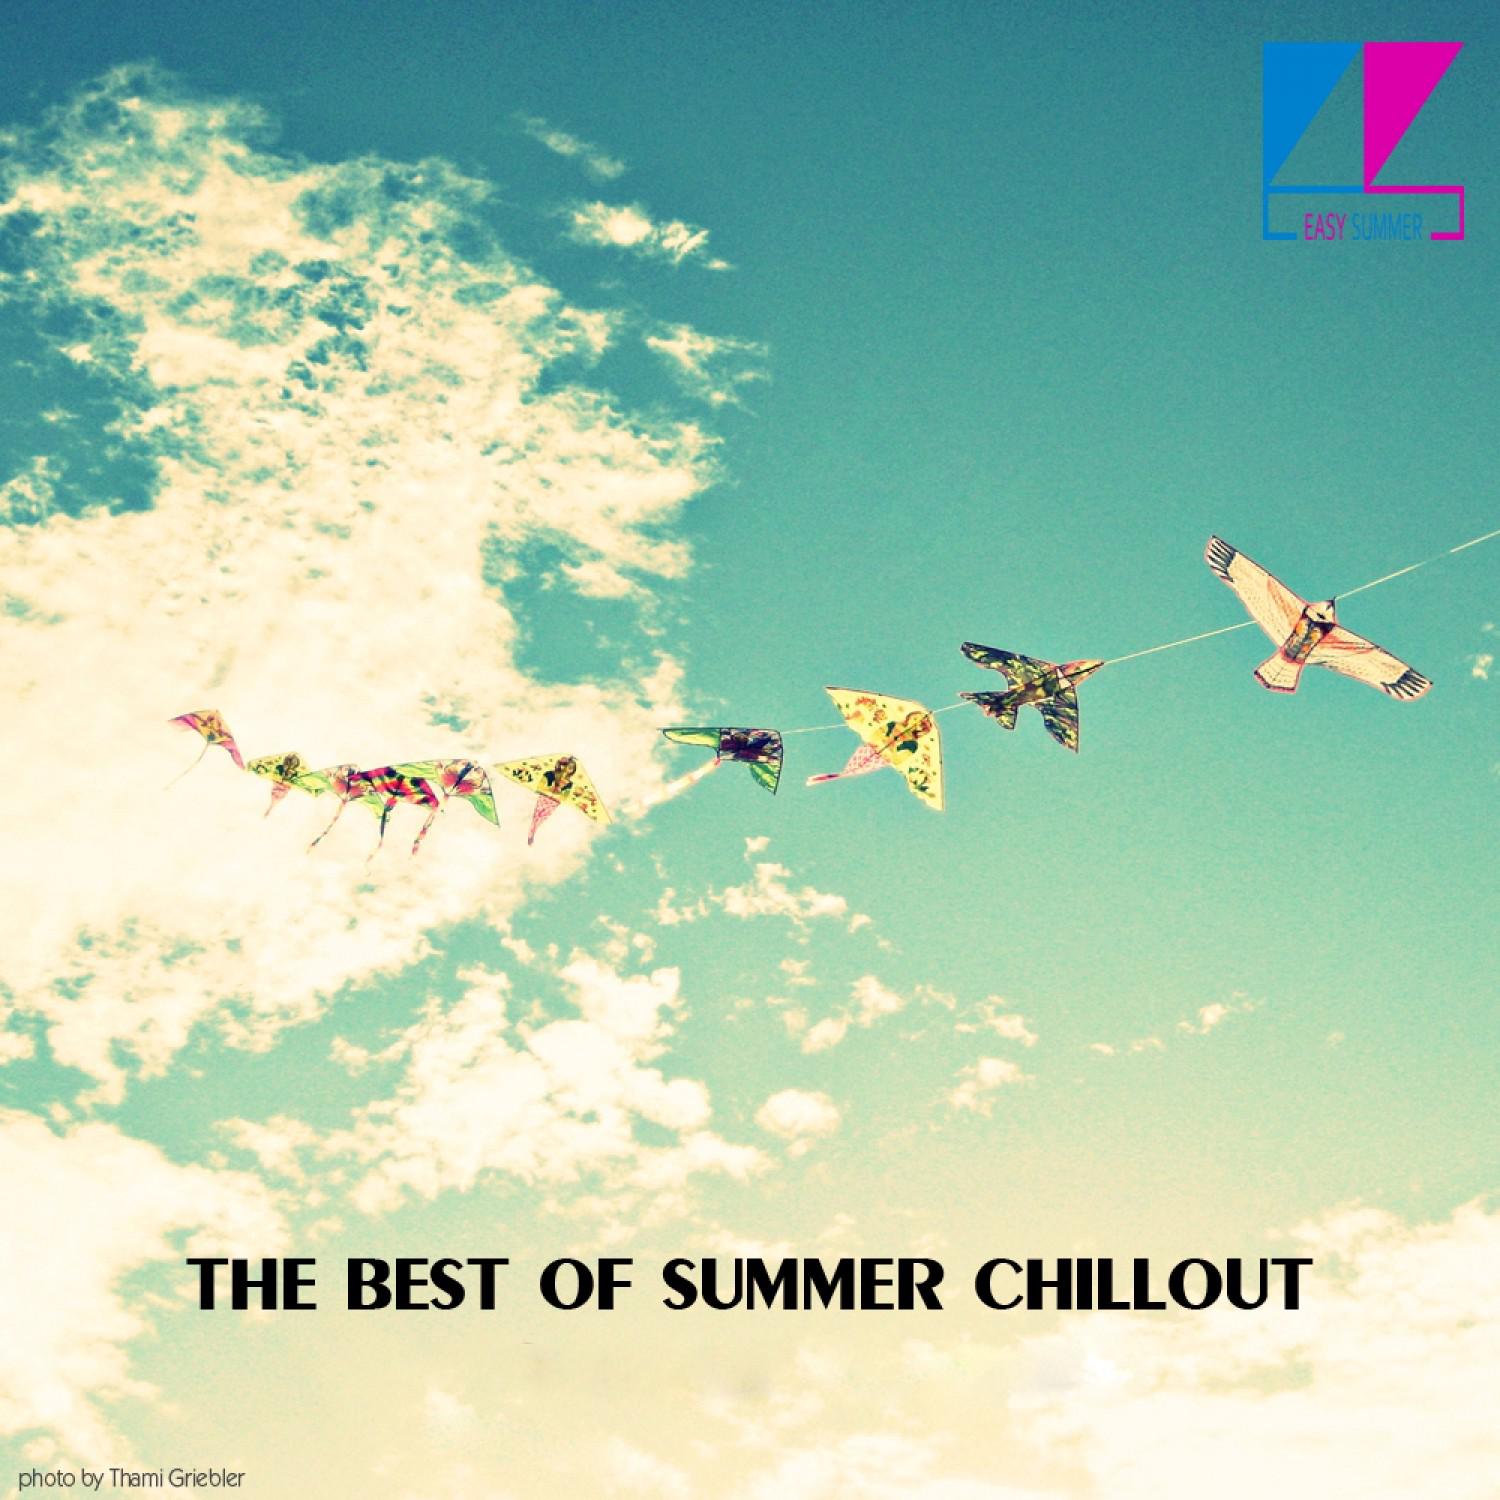 The Best of Summer Chillout